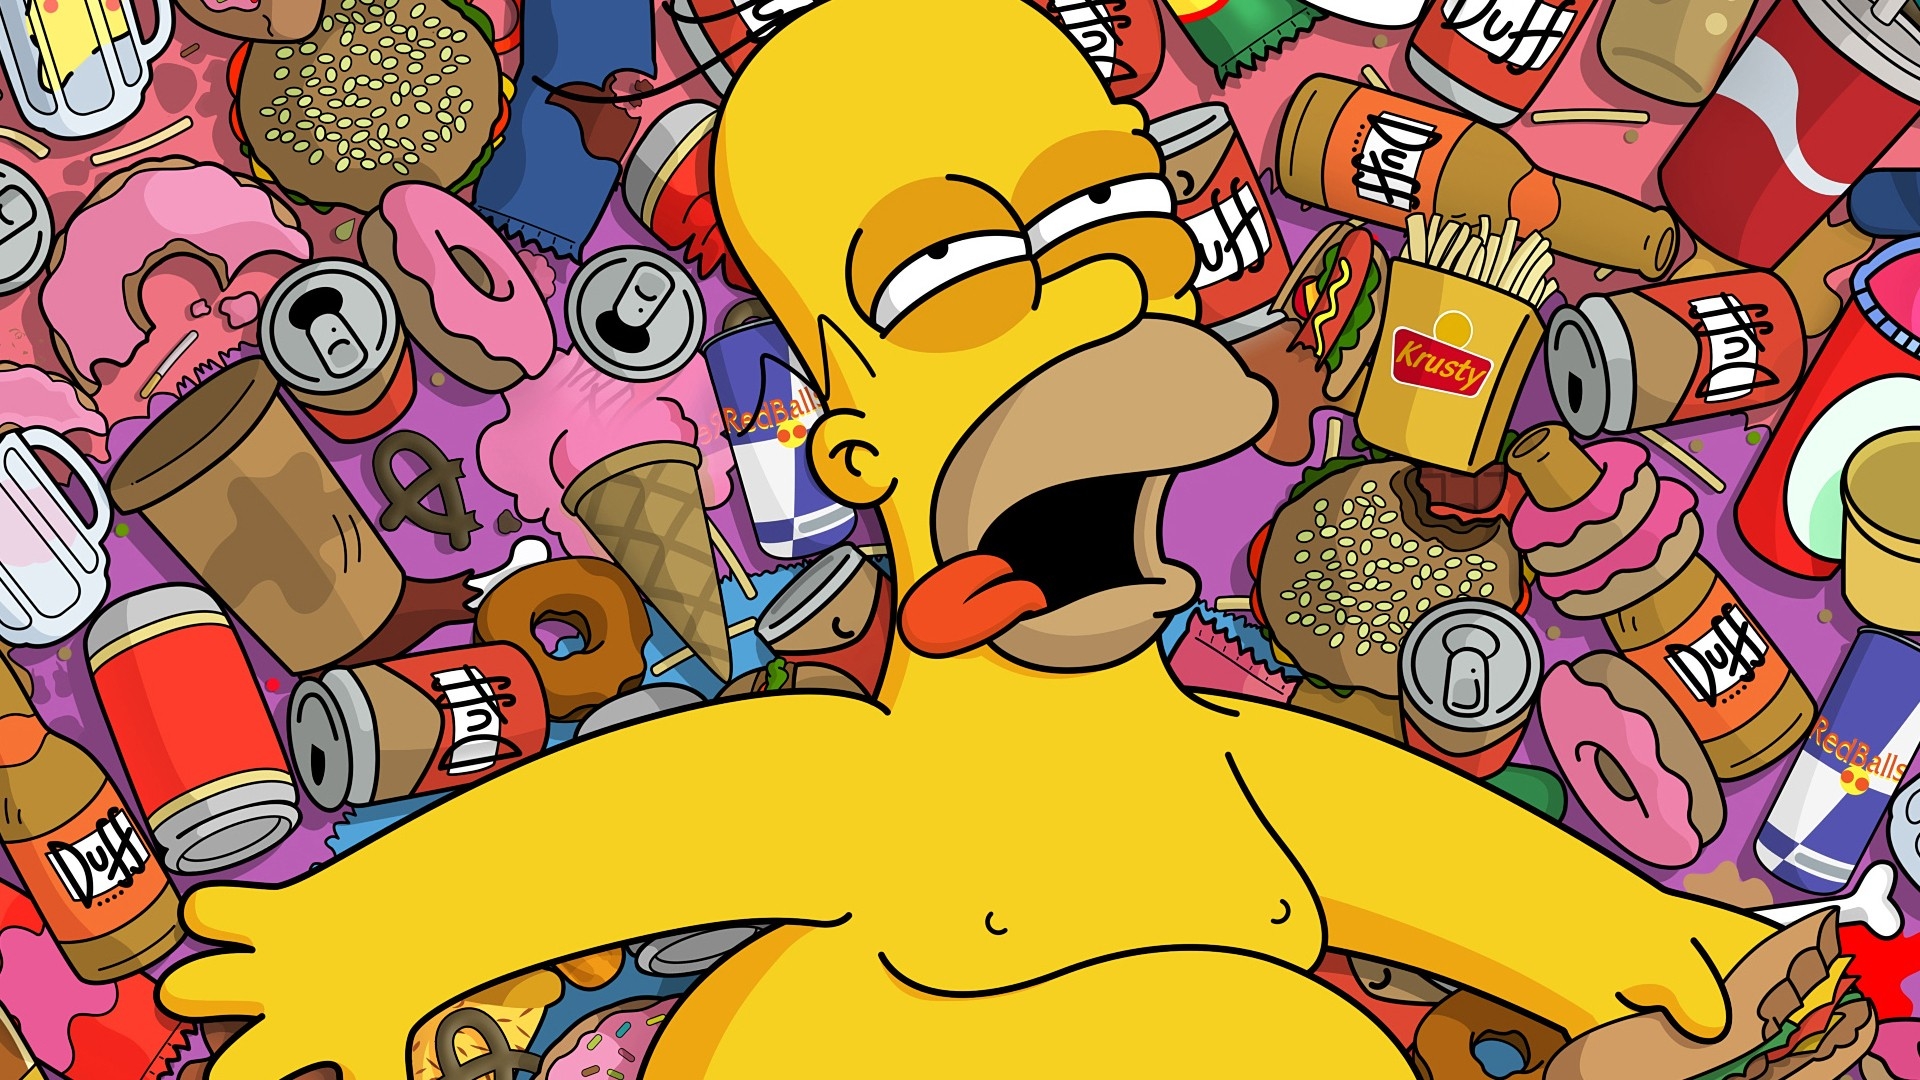 beers, Cartoons, Food, Ice, Cream, Homer, Simpson, Donuts, The, Simpsons, Krusty, The, Clown, Cigarettes, Red, Bull, Duff, Beer Wallpaper